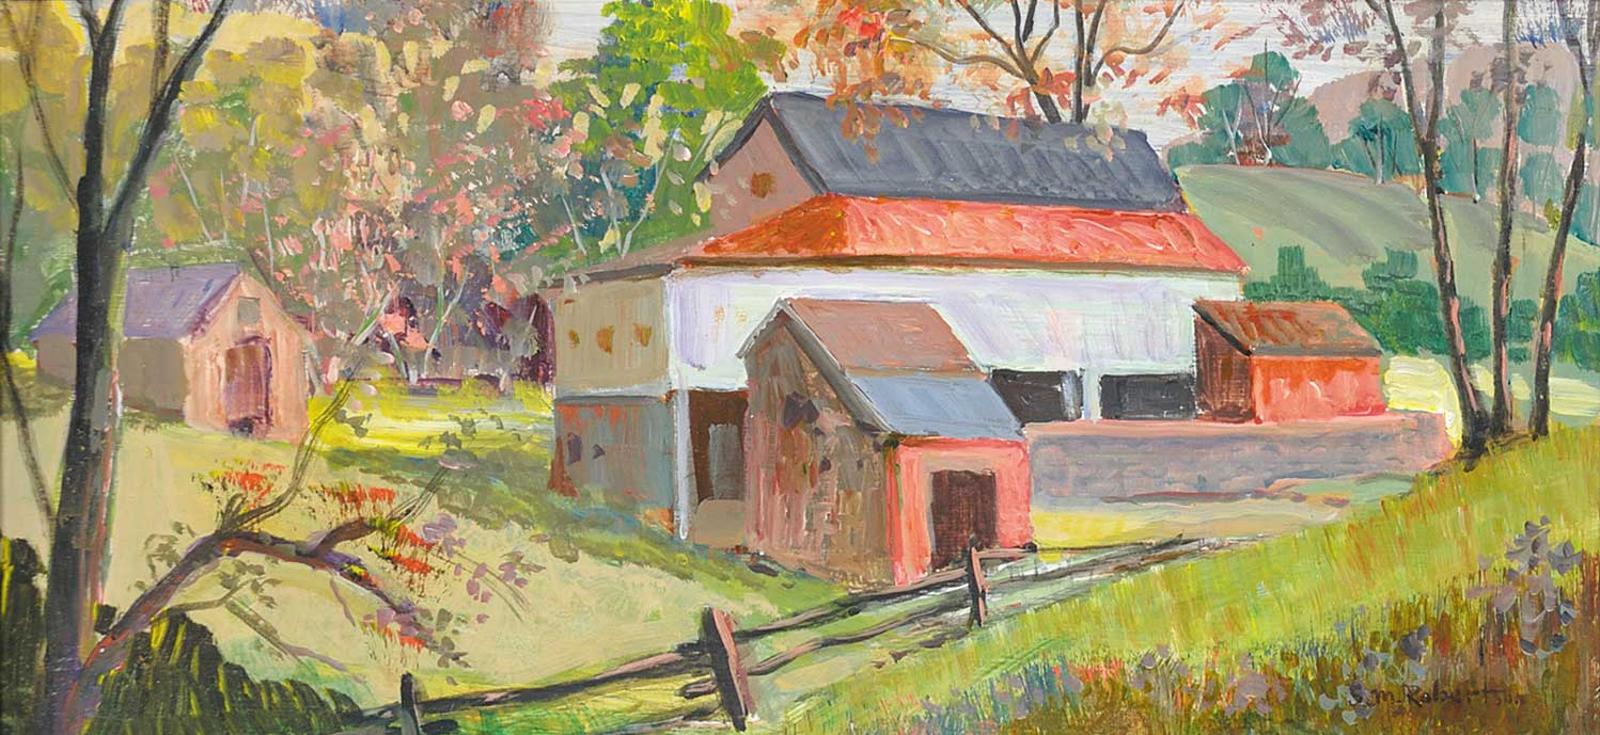 Sarah Margaret Armour Robertson (1891-1948) - Untitled - Farm with the Red Barn